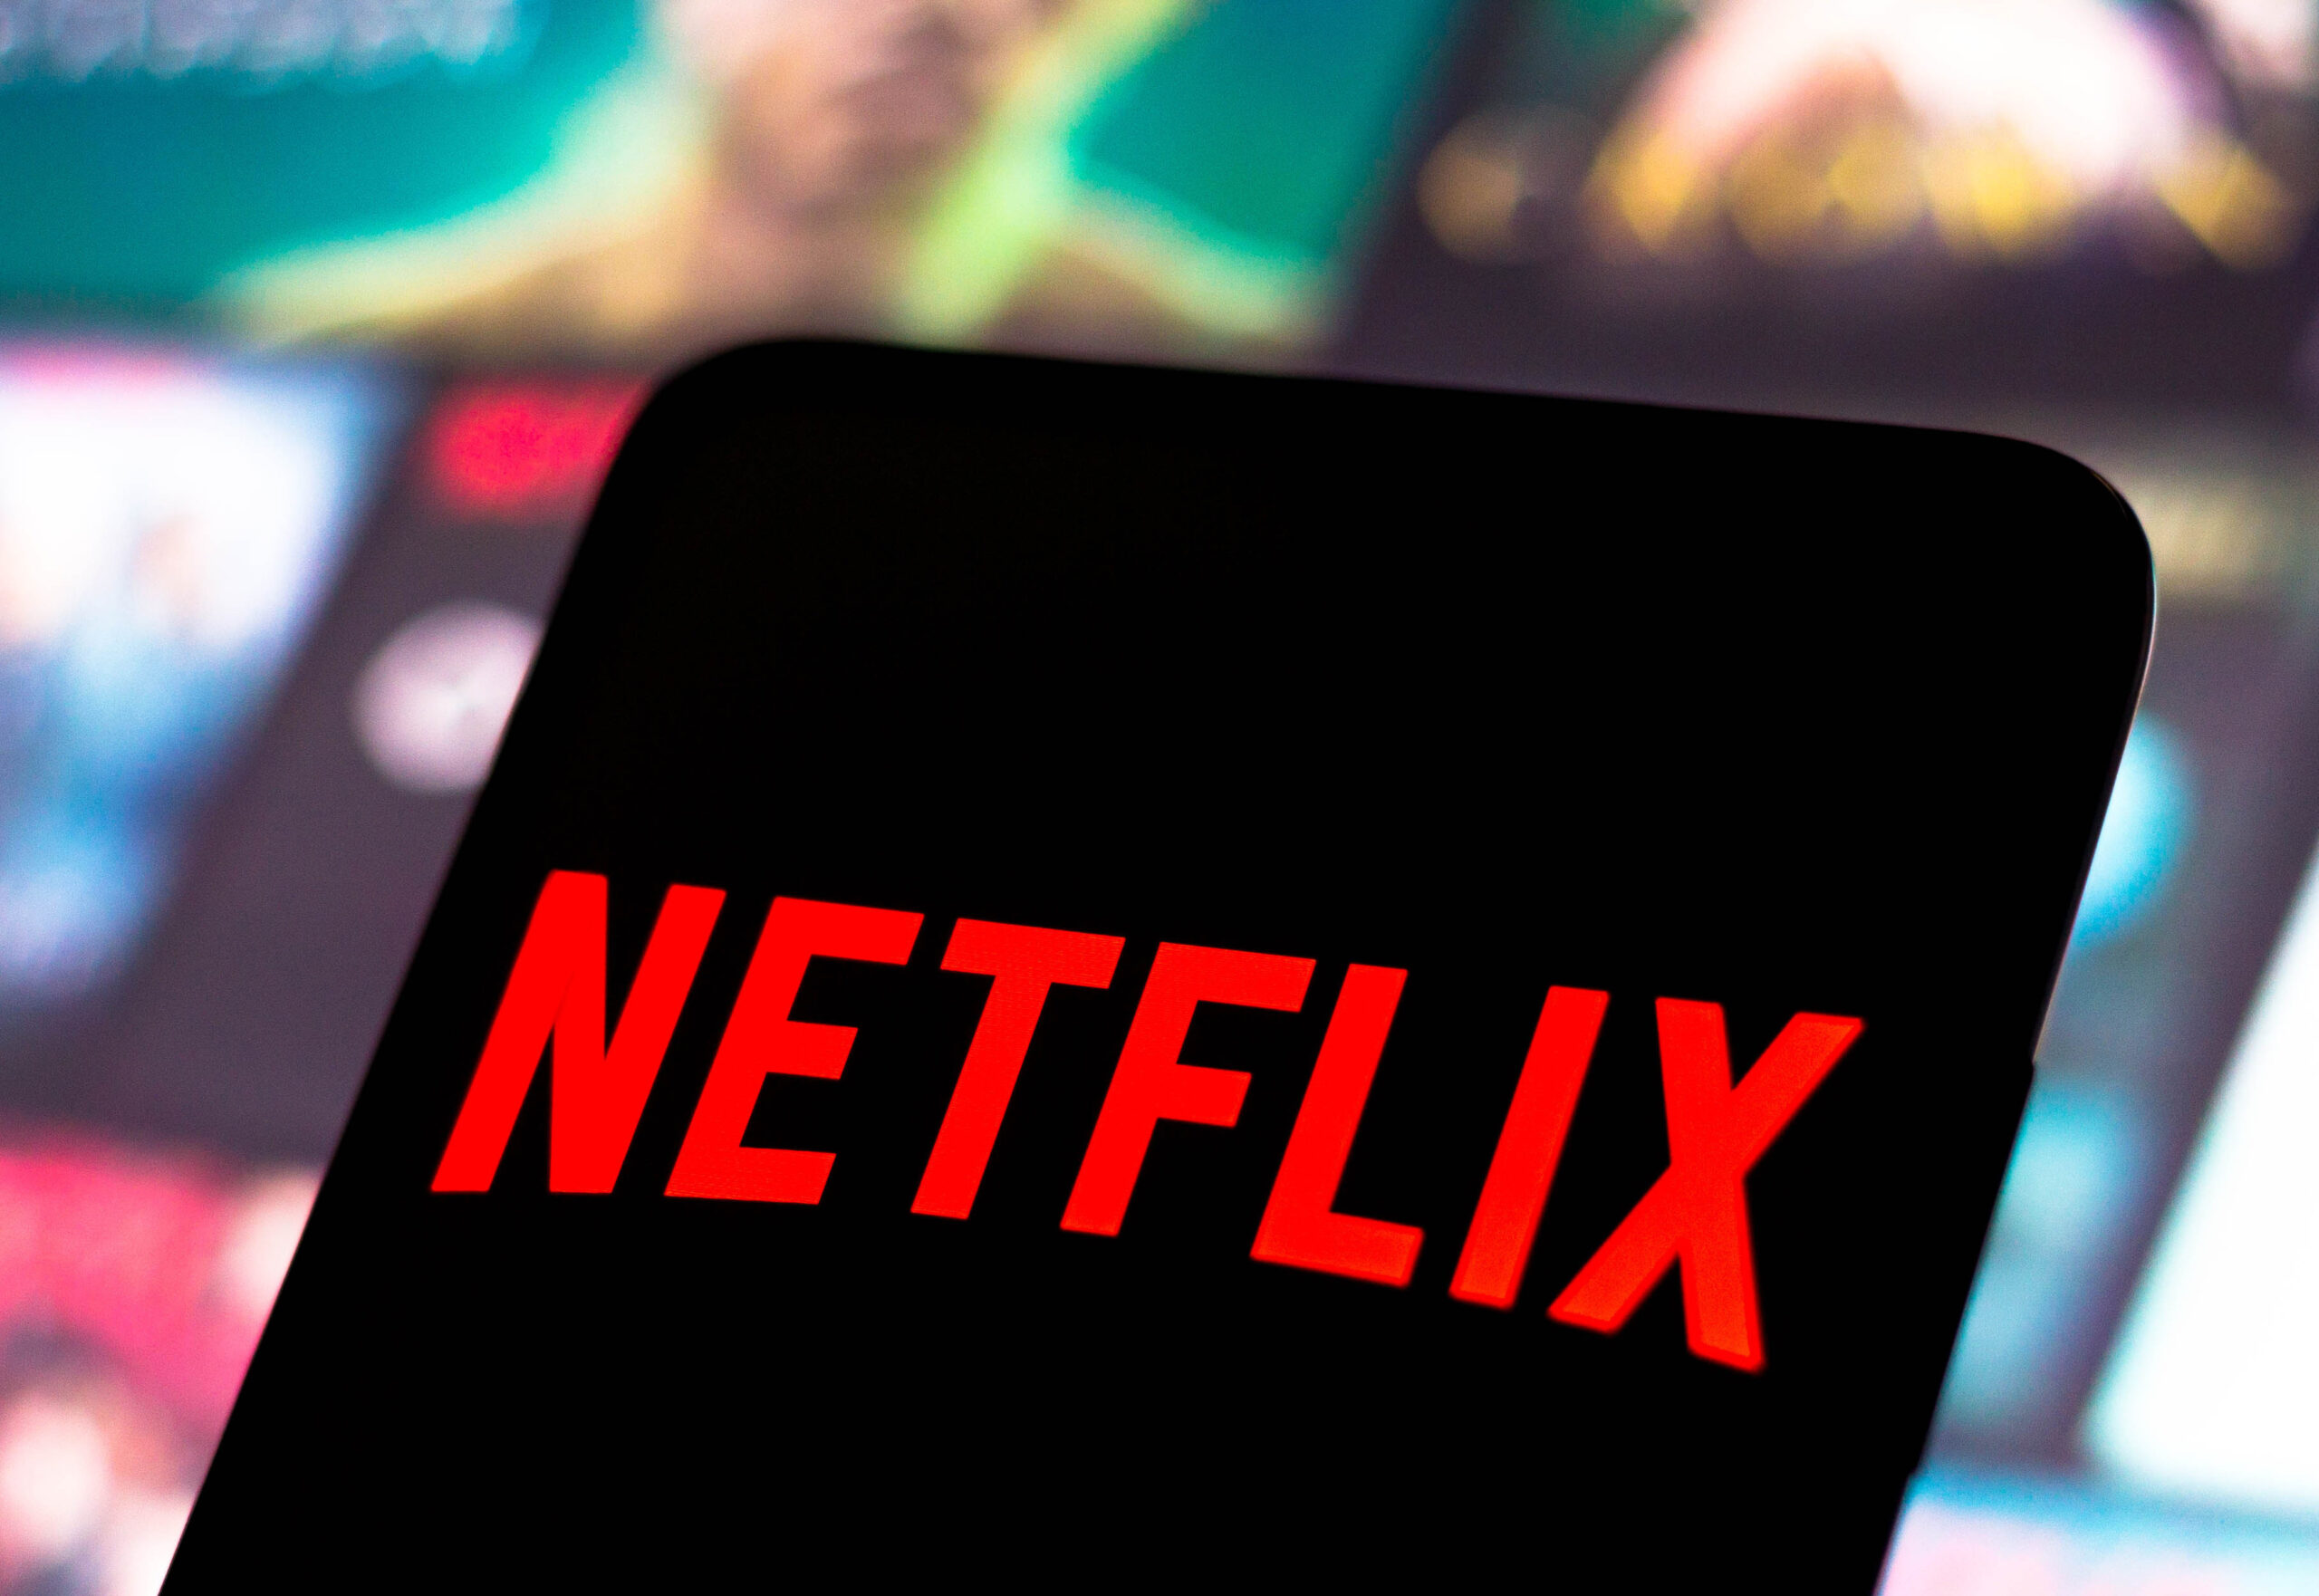 Netflix to Air Several NFL Games This Christmas